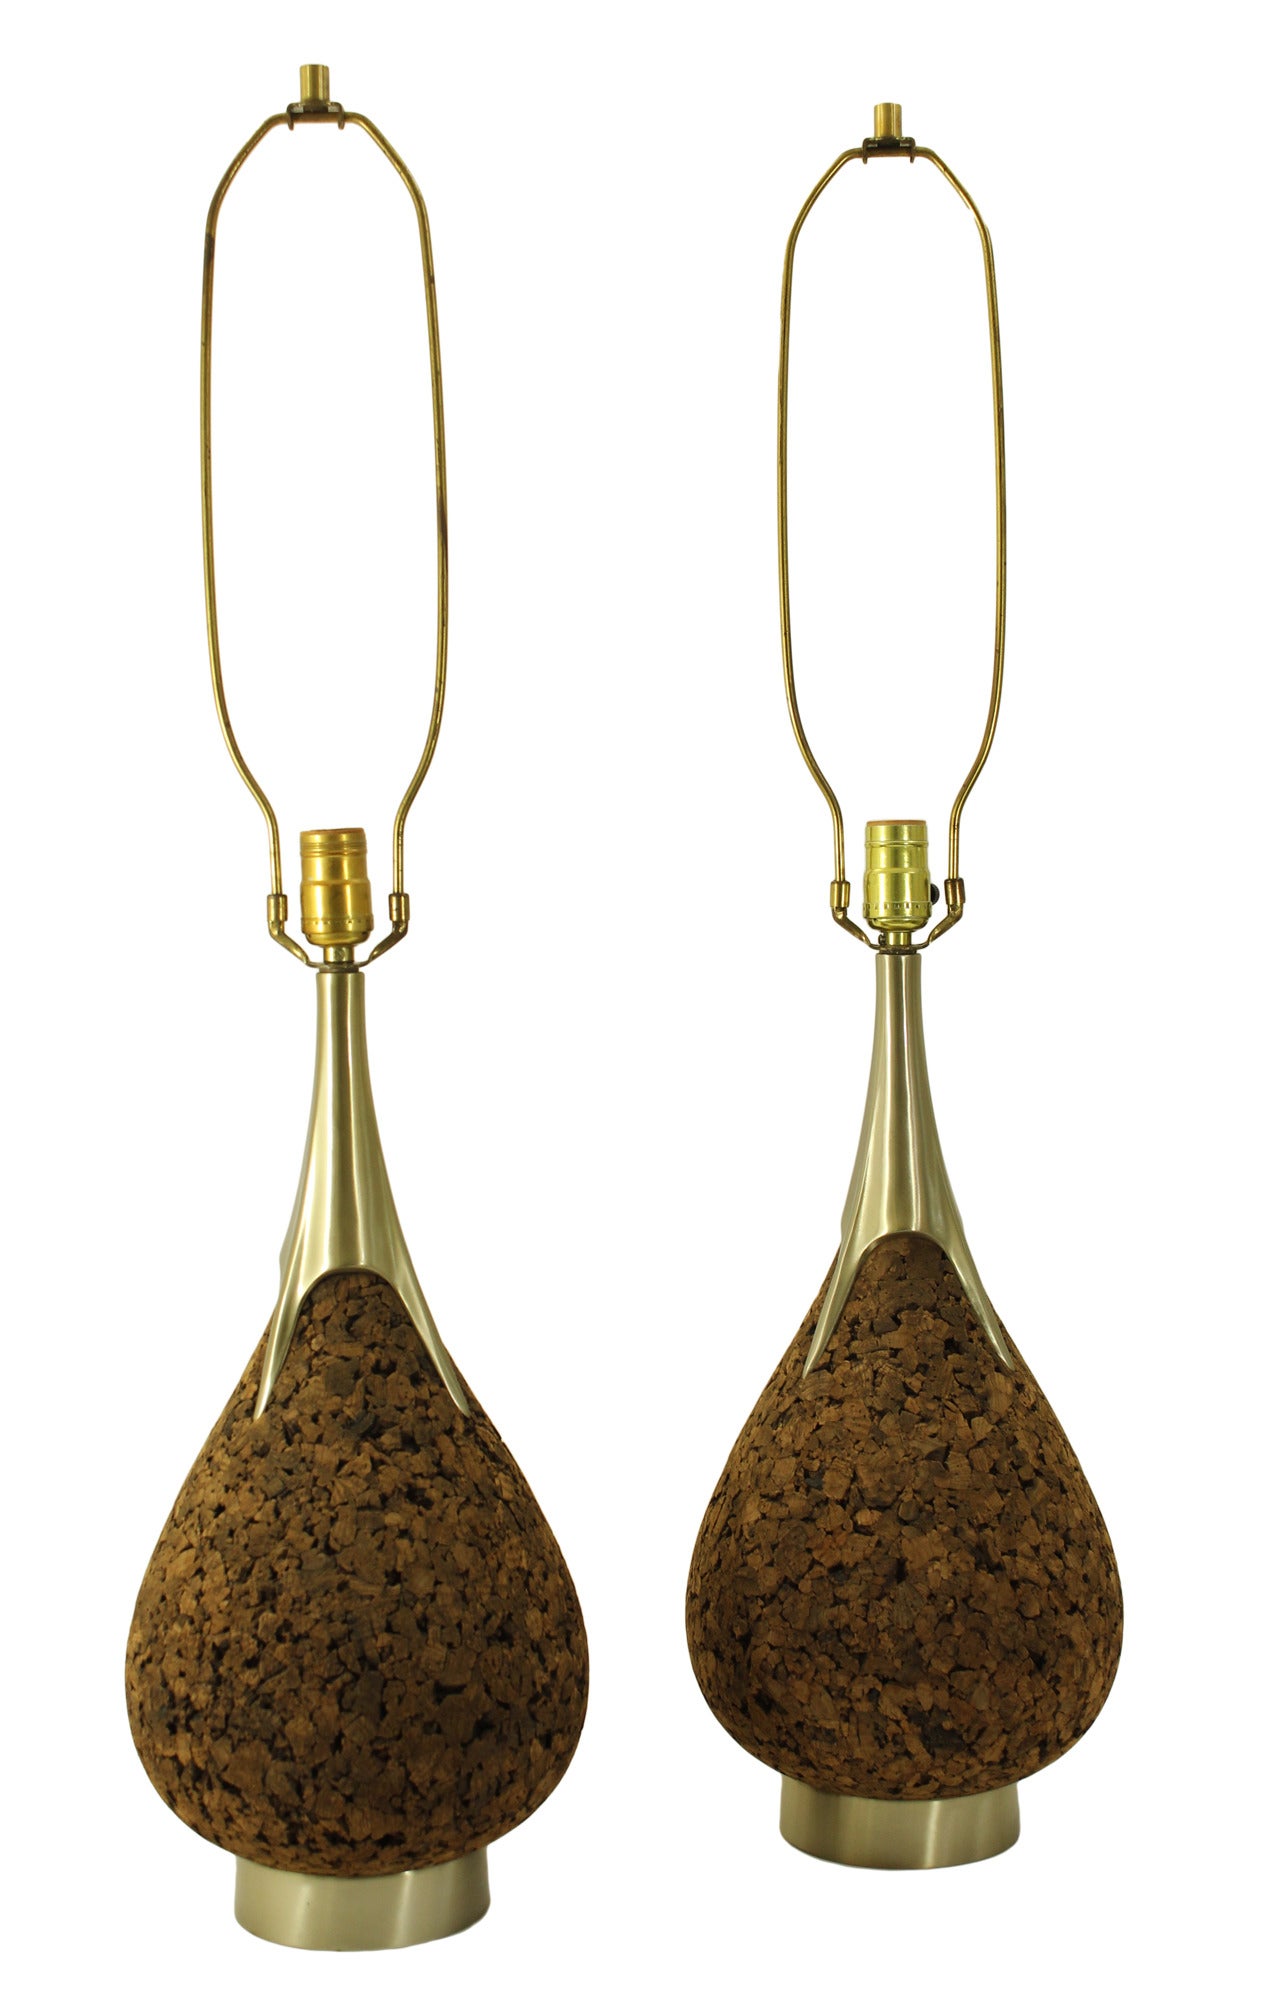 A pair of large Mid-Century Modern cork teardrop lamps from laurel featuring heavy solid brass castings at the top and base. In very good working condition with virtually no signs of wear except to the upper hardware parts (harps and finials) which